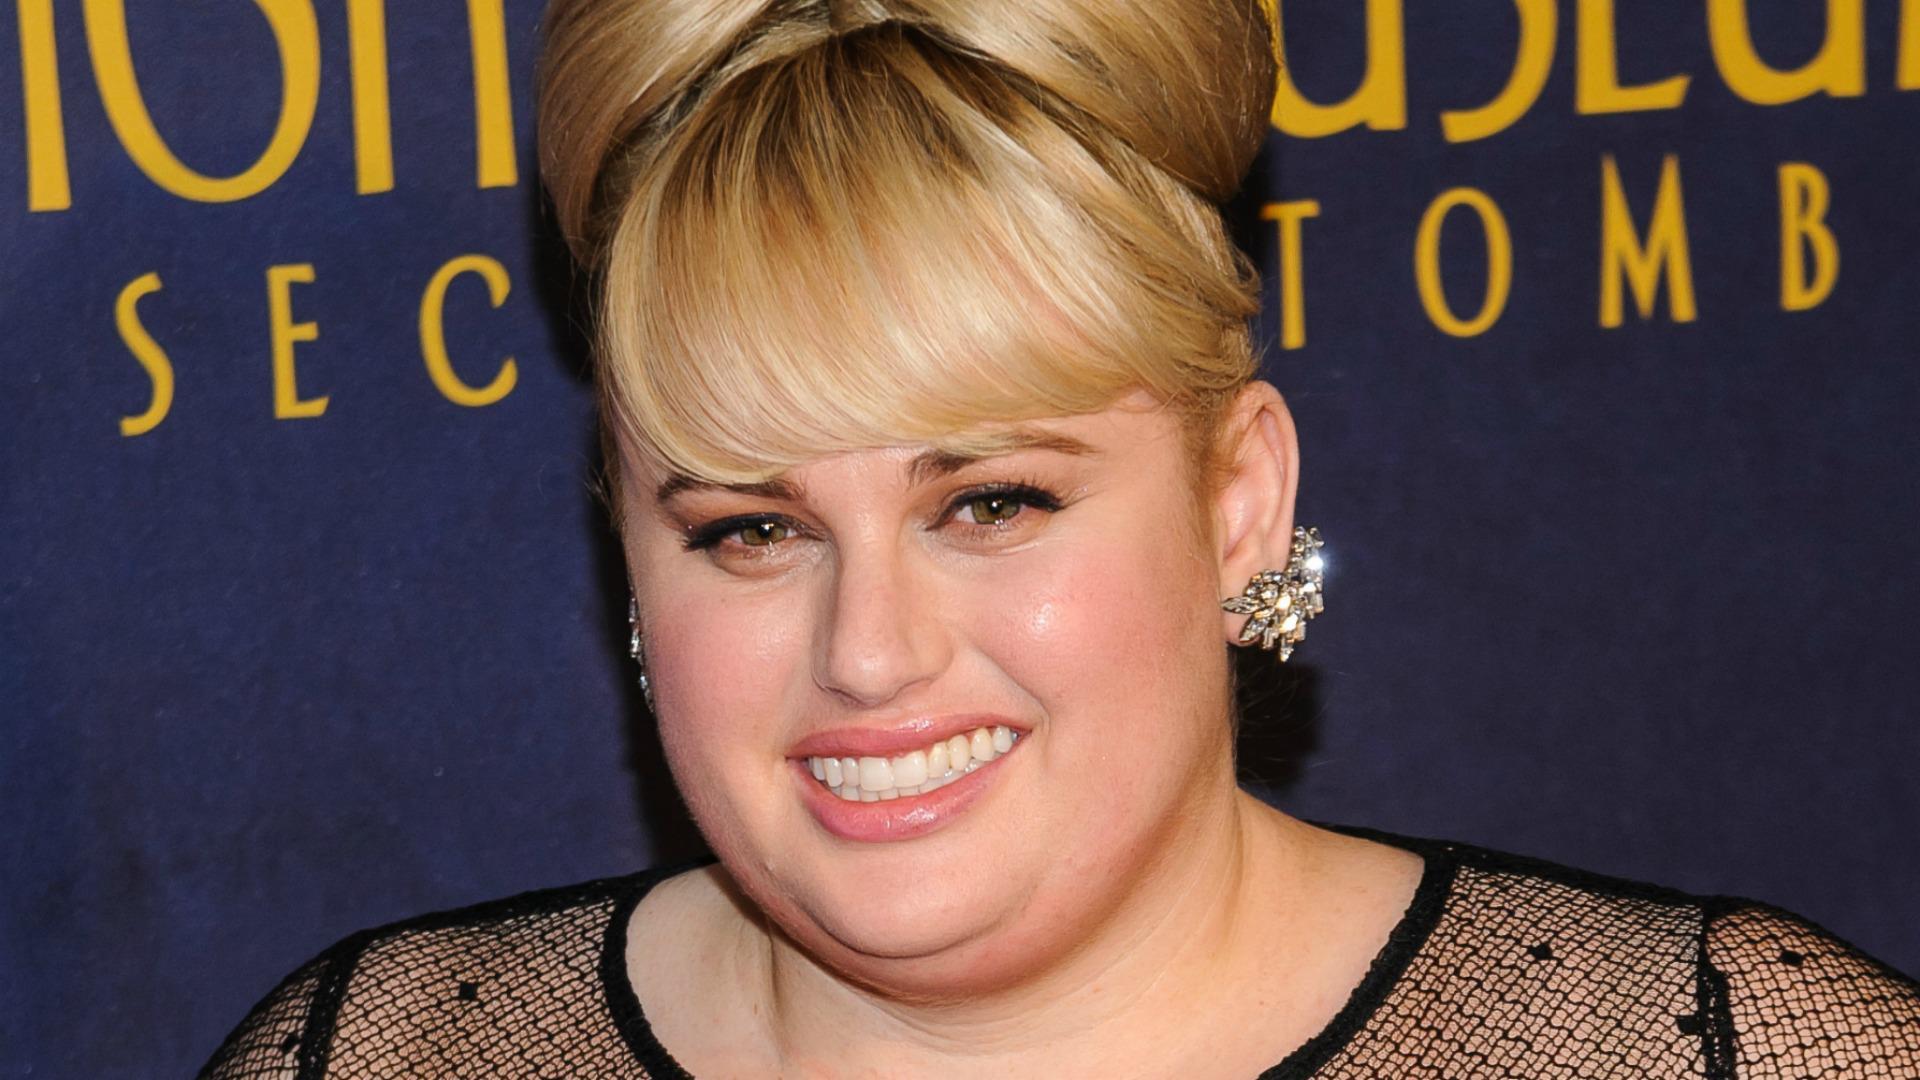 Rebel Wilson and other celebrities who won't go nude